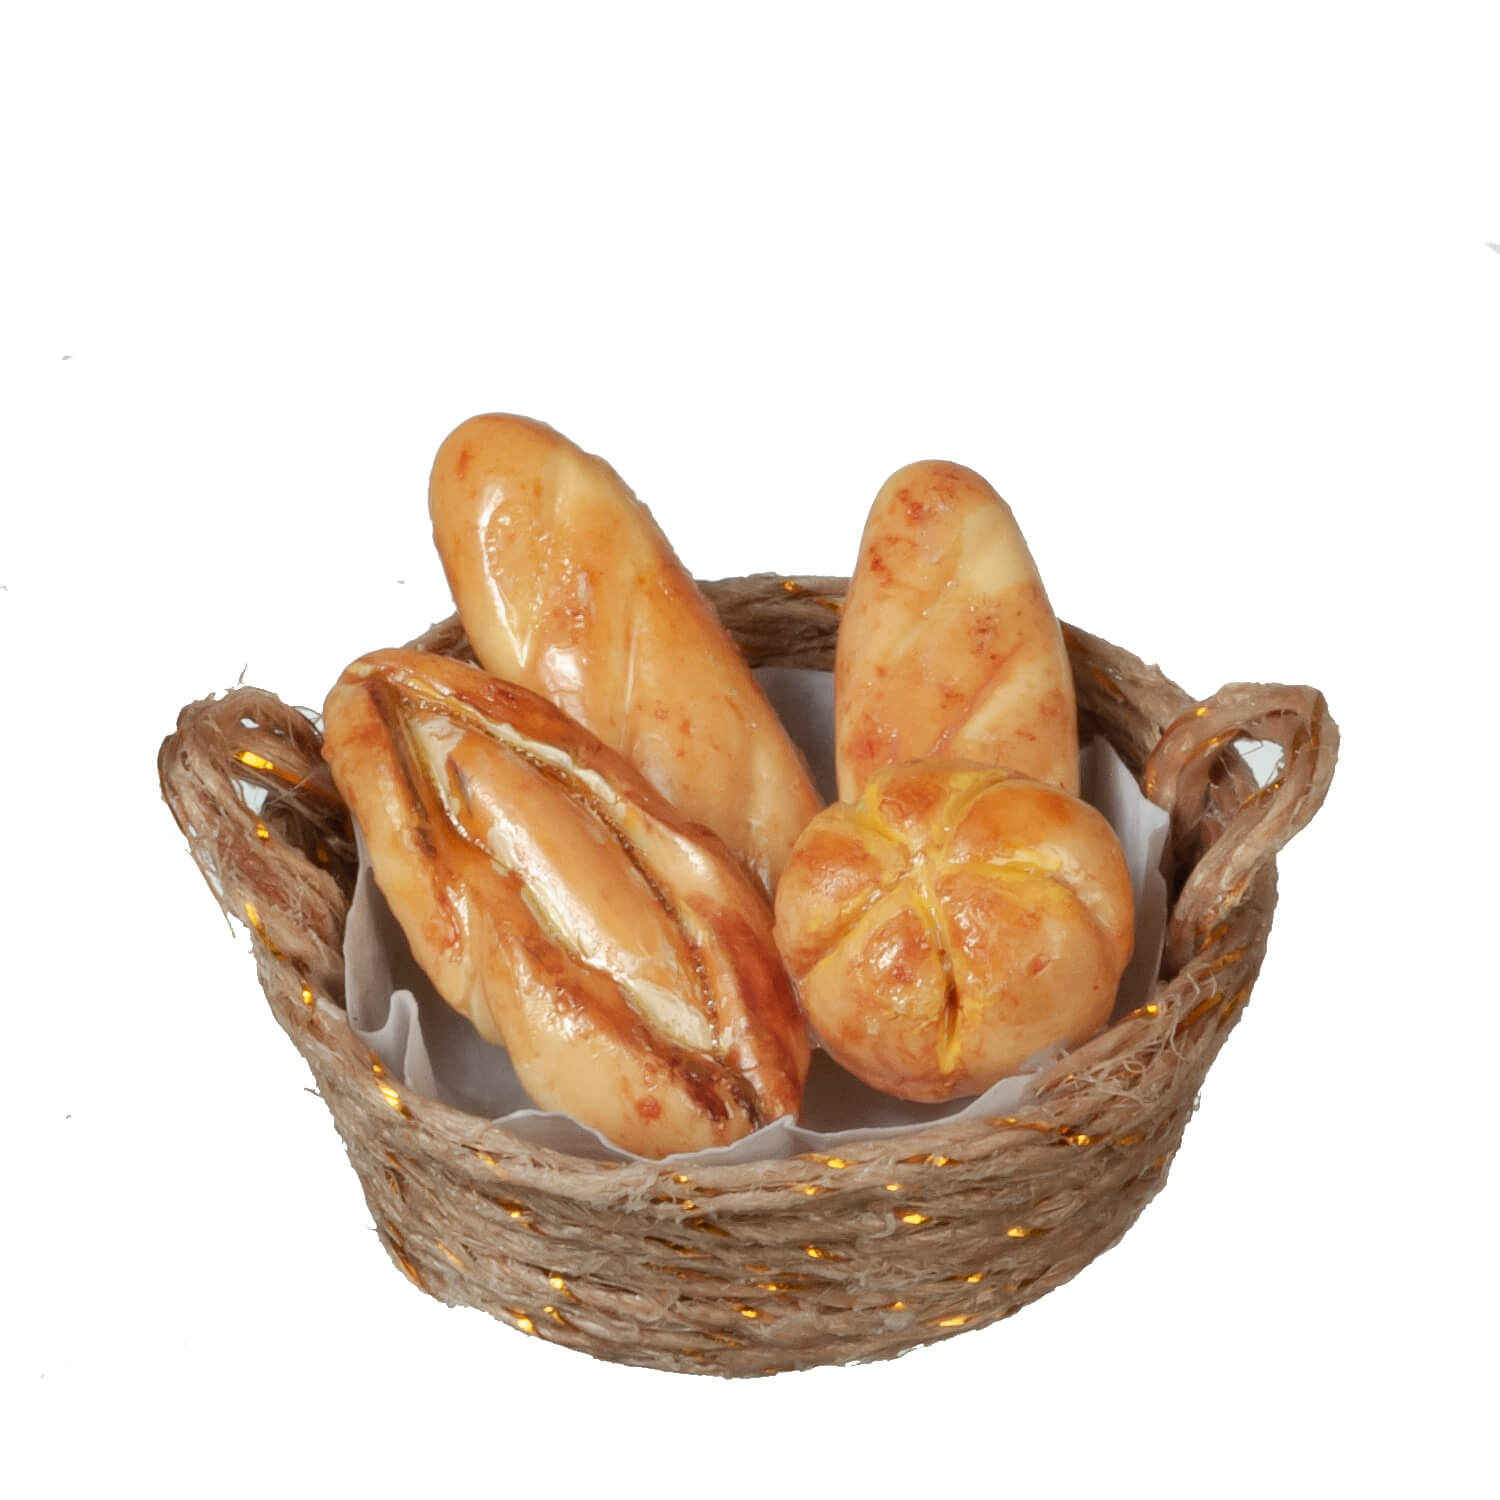 Basket of Breads Style 2